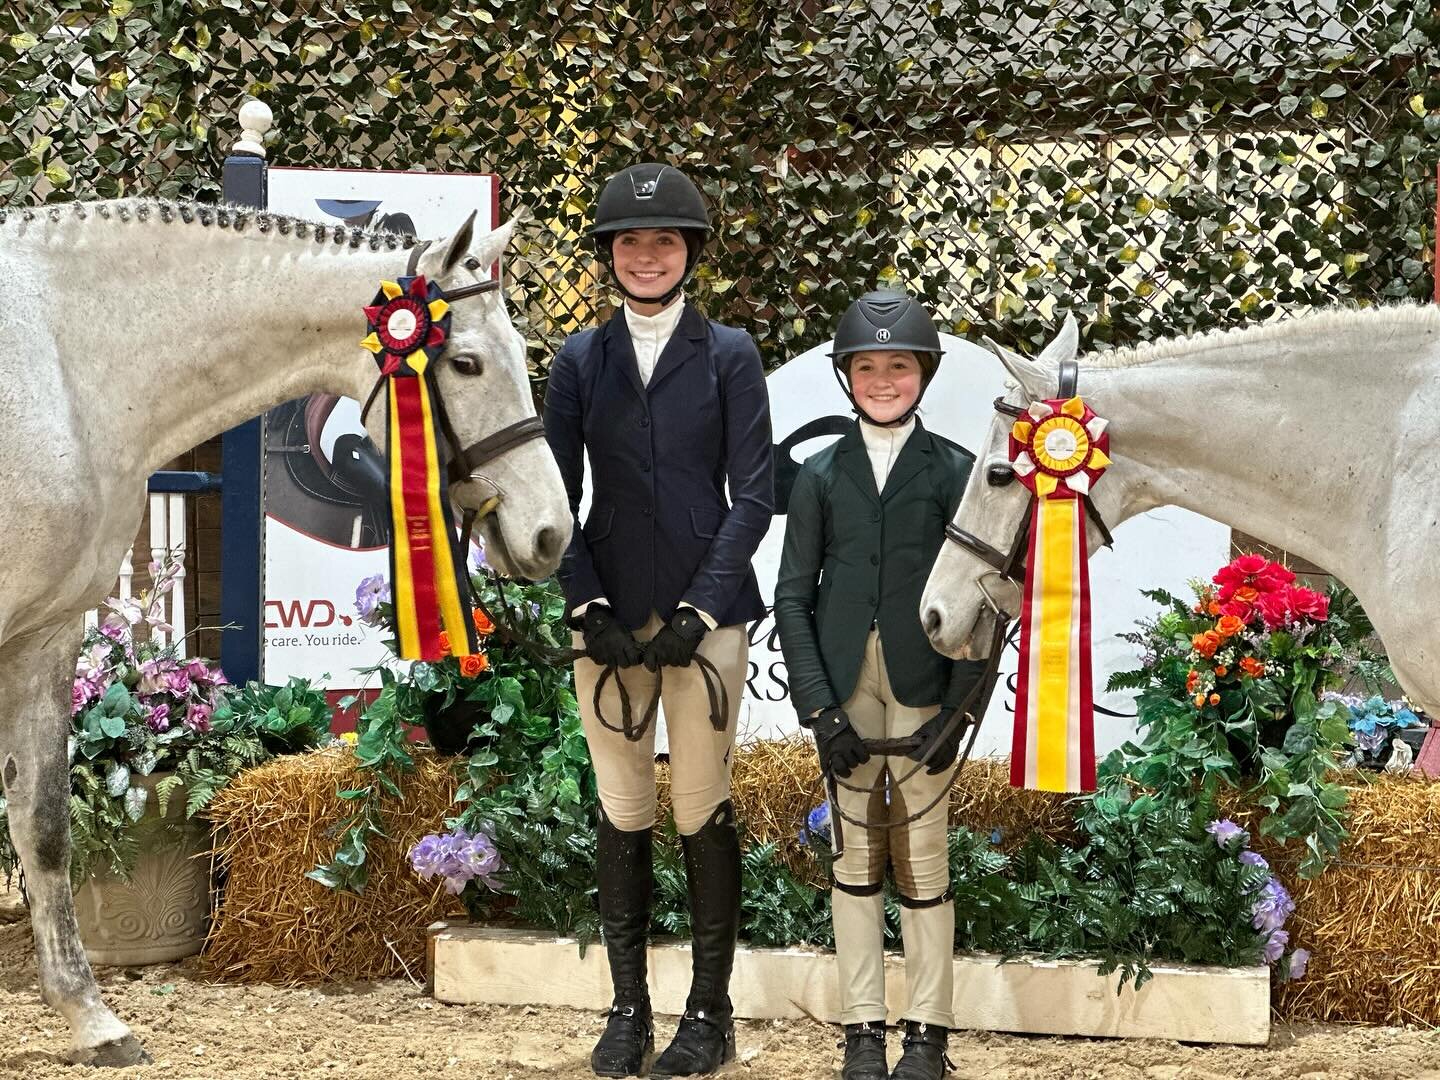 Quick yet successful show at the Partridge Run February National! Horses and kids were great!

-Greyson and Hannah Amig ended up Champion in the Children's Hunters

-Stonewall Texas and Brynn Bear stepped up to show against the Older Children's to fi